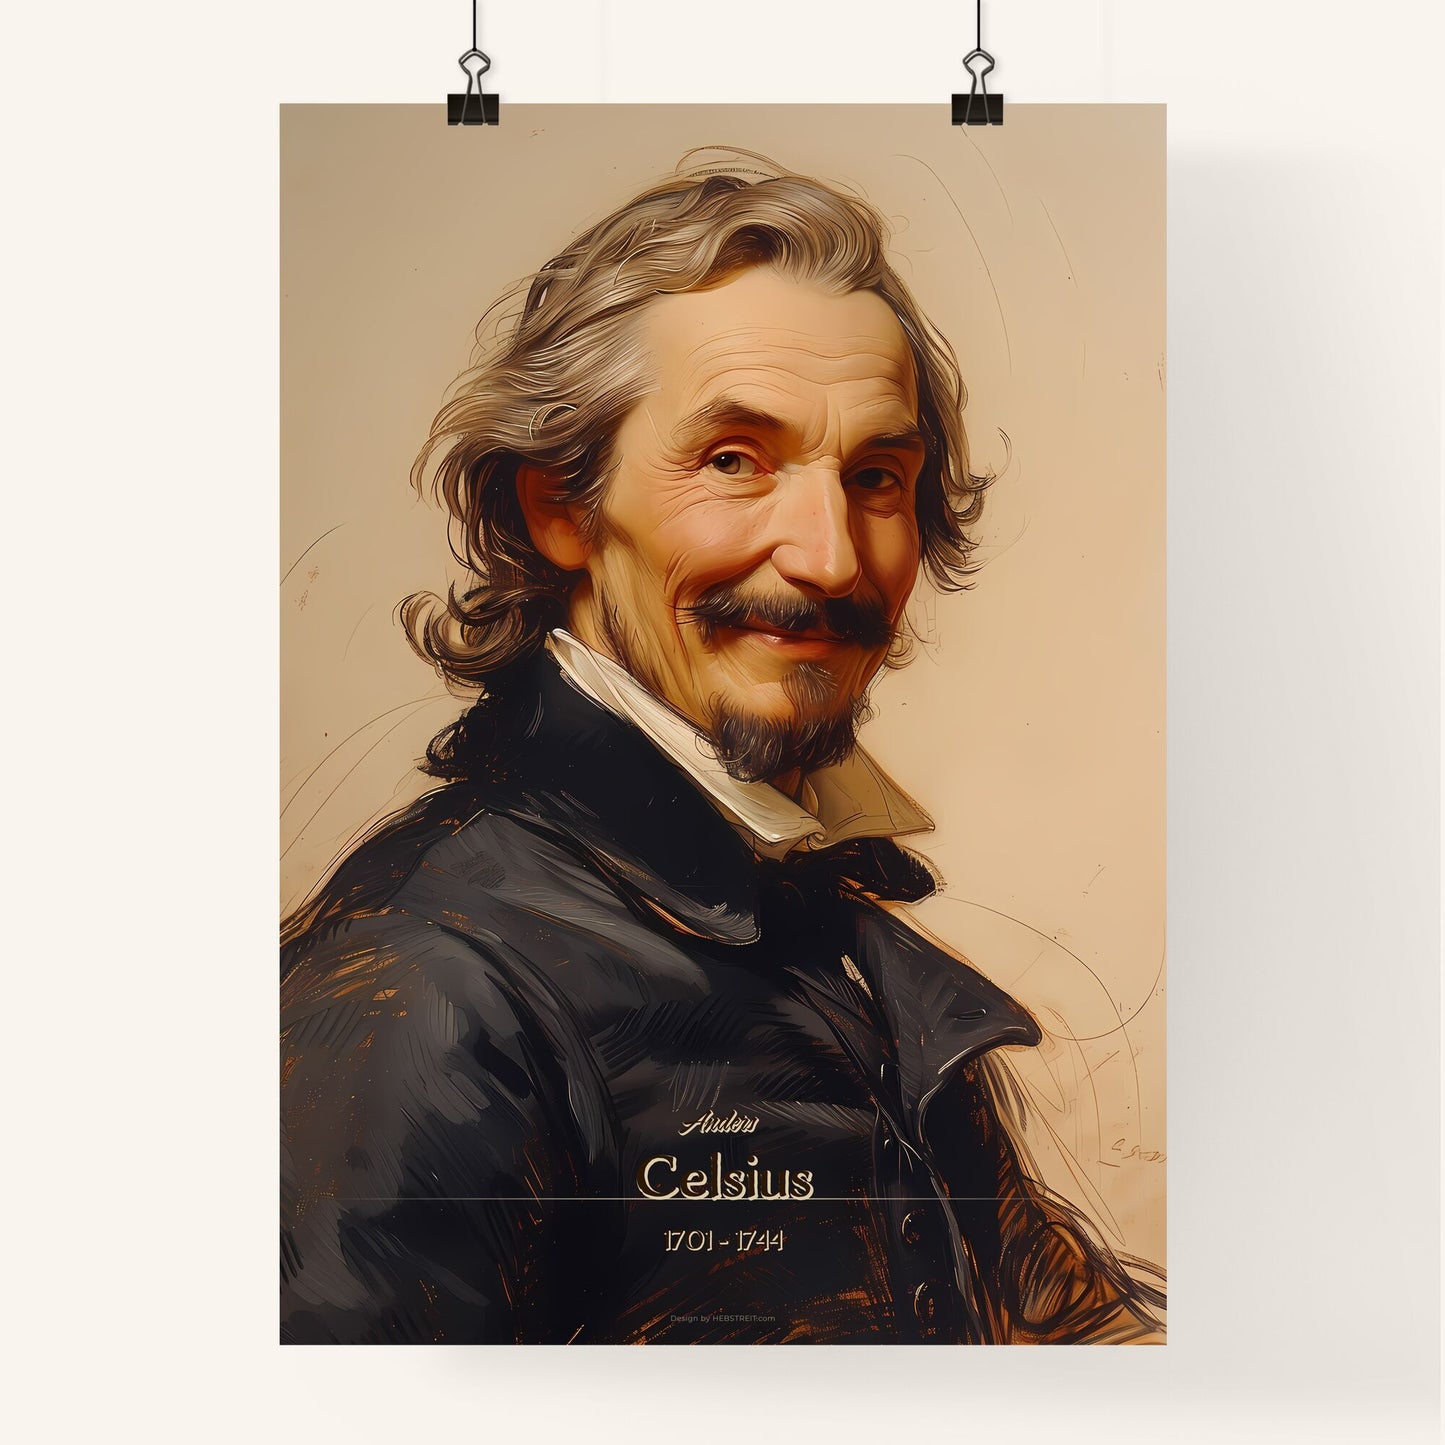 Anders, Celsius, 1701 - 1744, A Poster of a man with long hair and a mustache Default Title